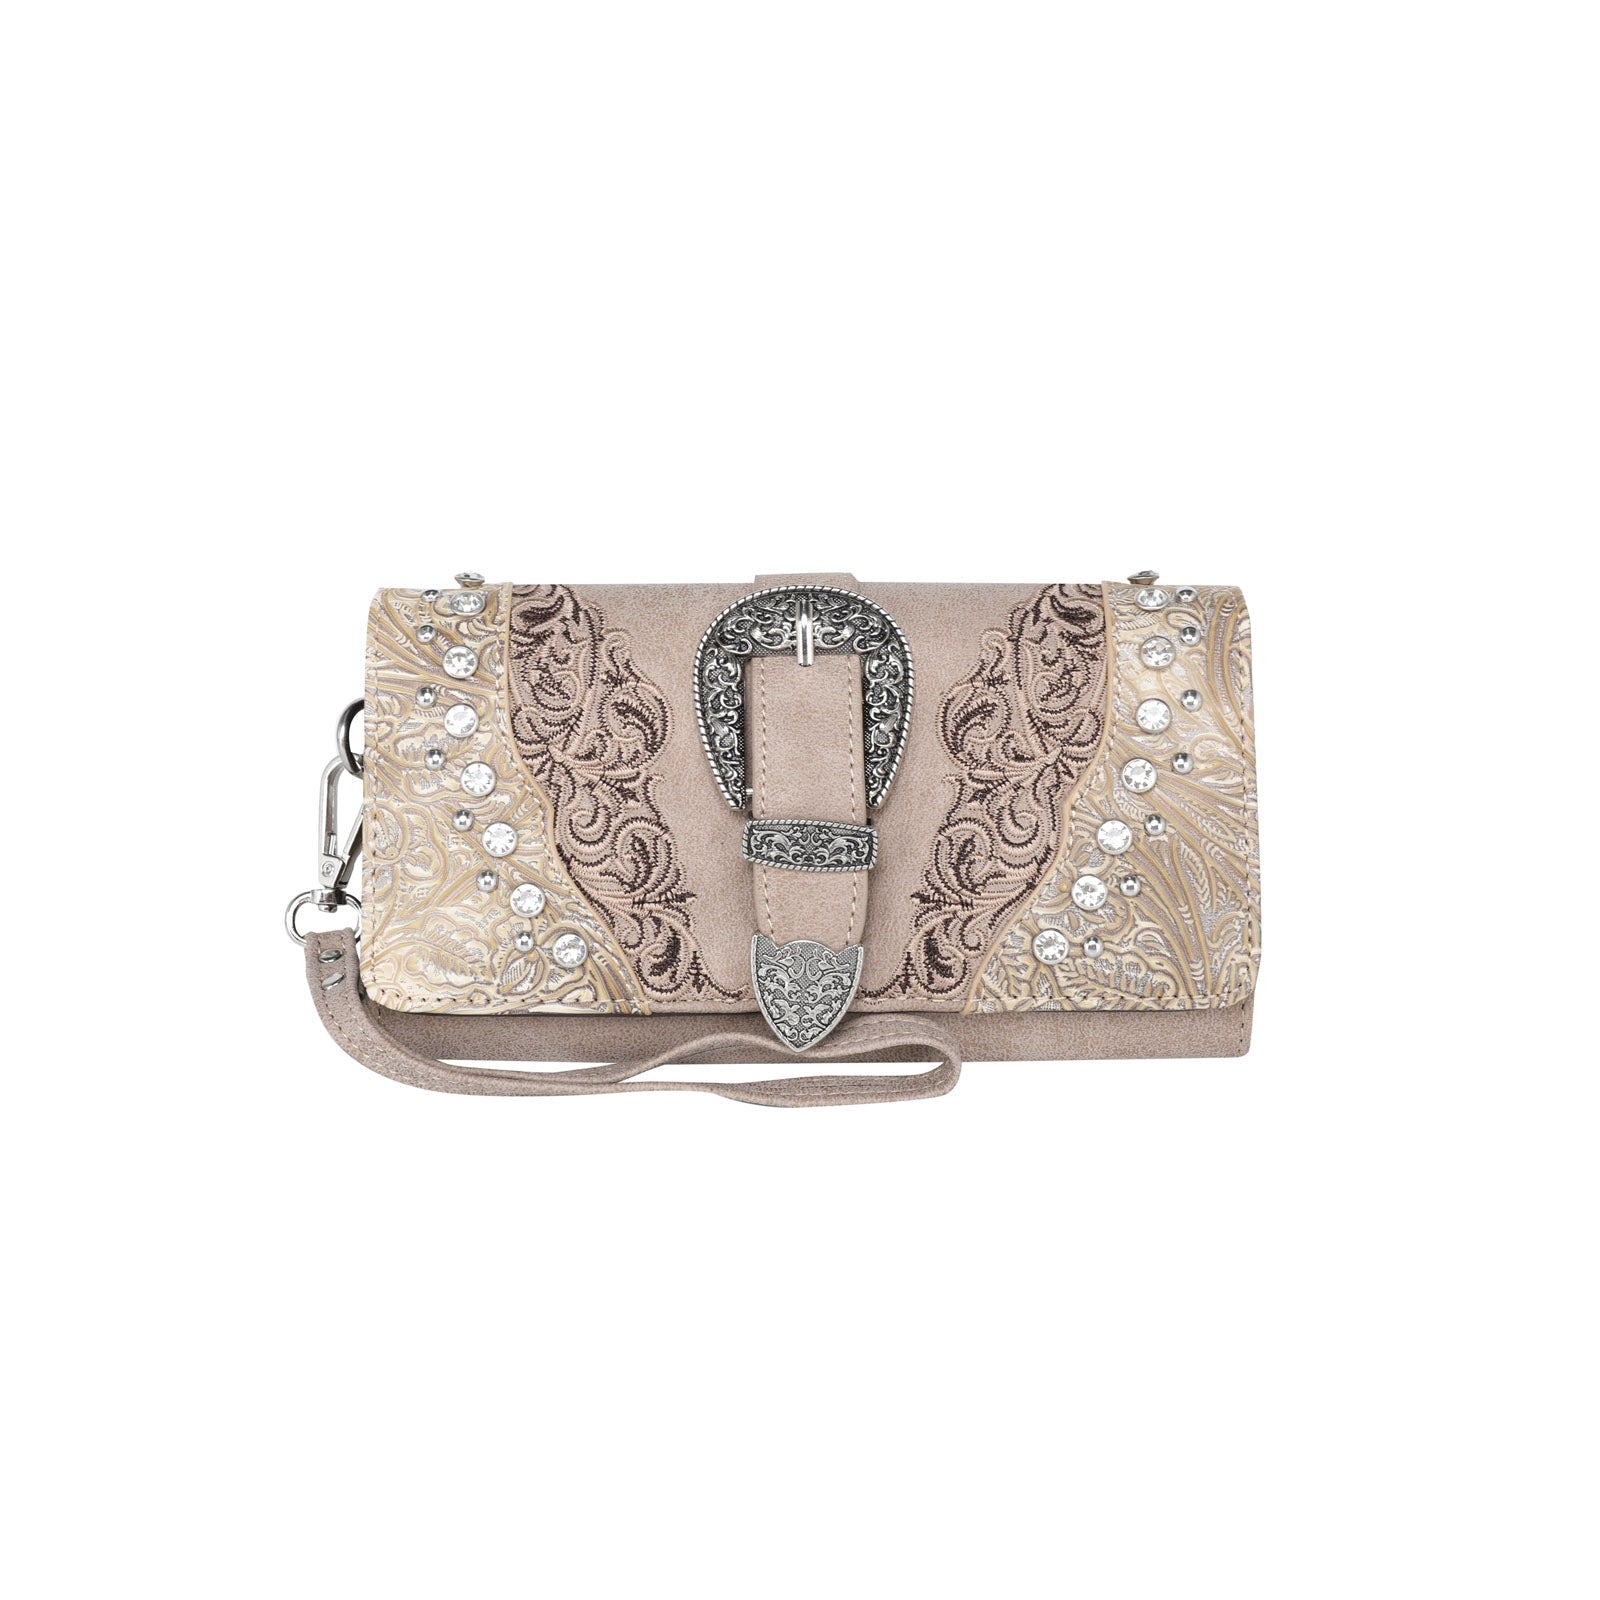 Montana West Embossed Crystal Buckle Collection Wallet - Montana West World